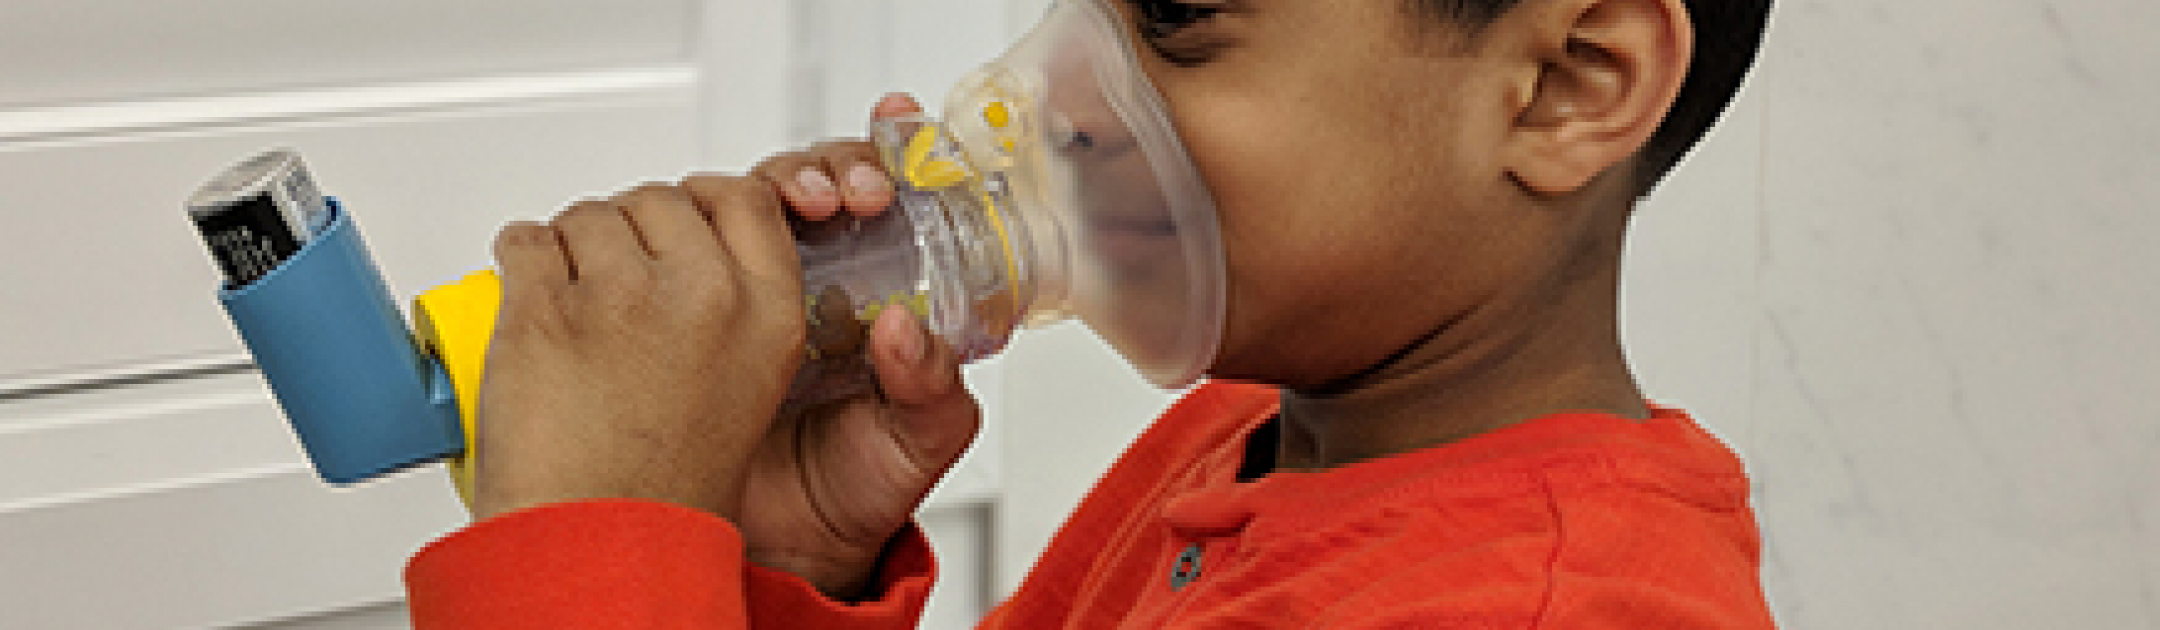 Child using an age-appropriate valved spacer device with an asthma inhaler